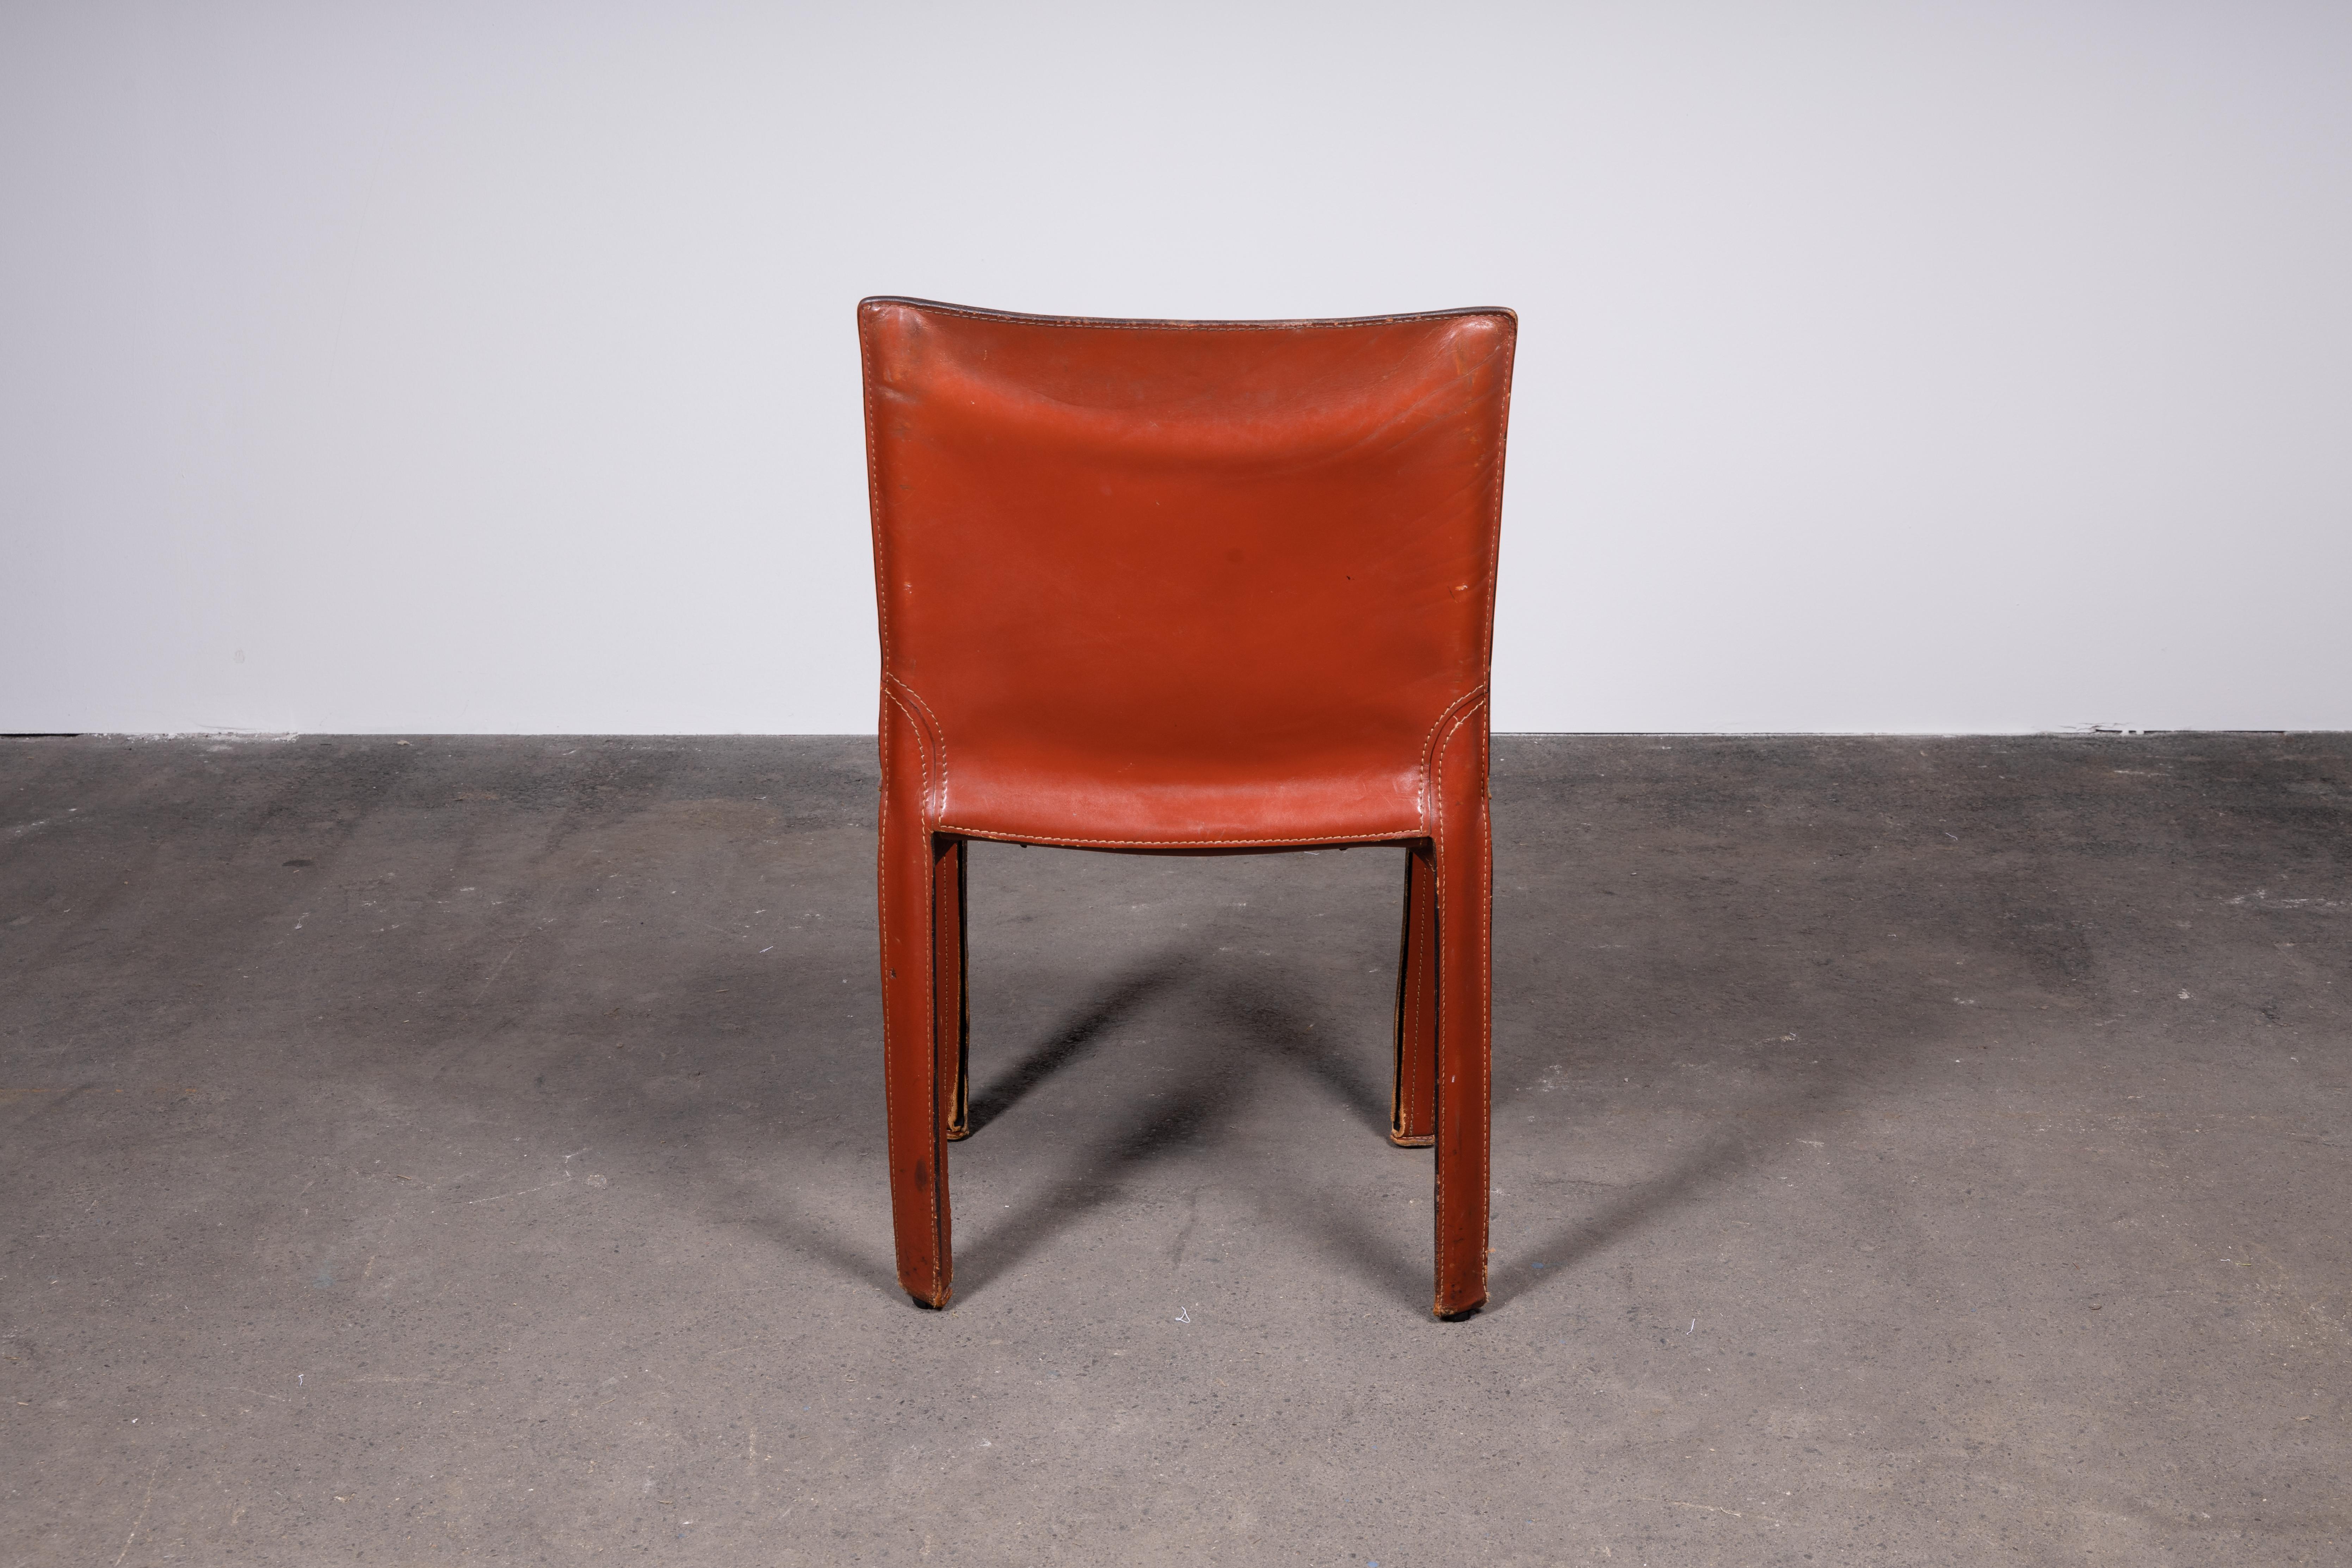 Italian 4 Mario Bellini CAB 412 Chairs in Cognac (Russian Red) Leather for Cassina